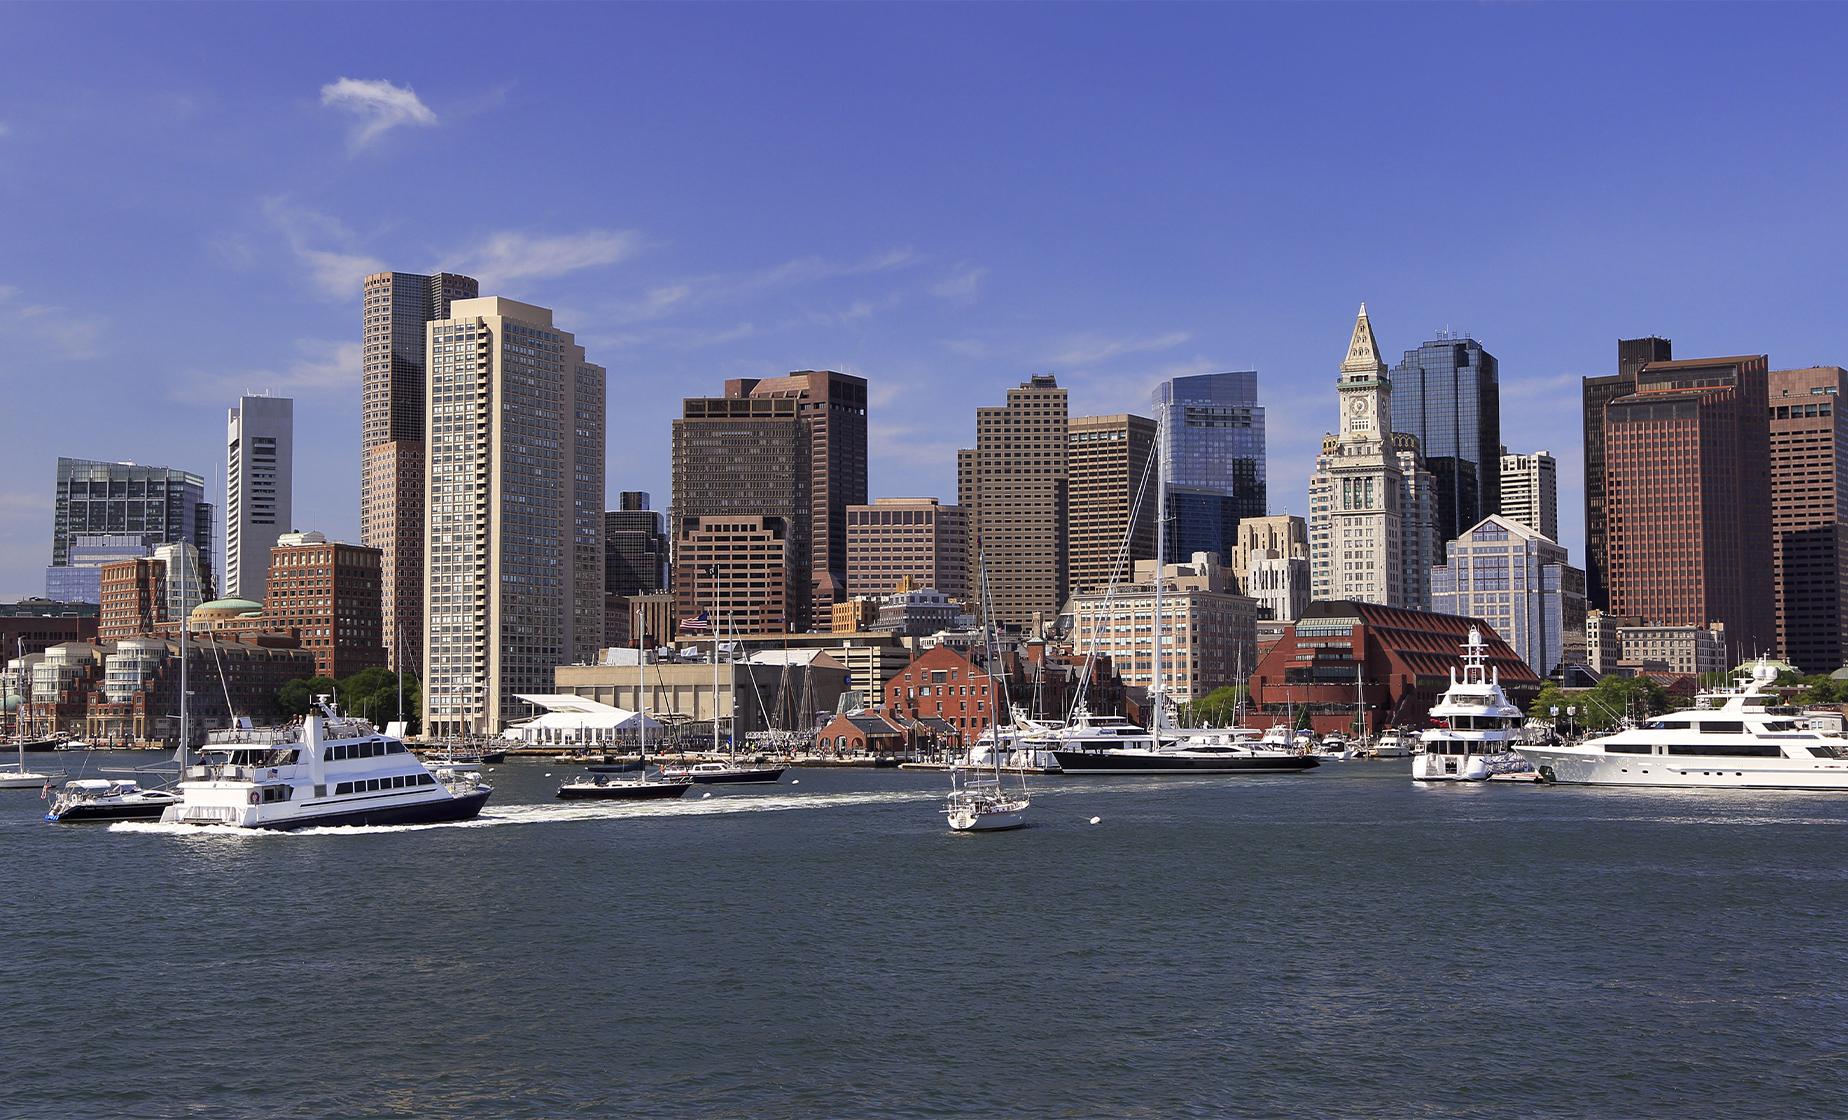 Boston Harbor Historic Sightseeing Cruise Tour (Dorchester Bay, Quincy Bay, Neponset River)